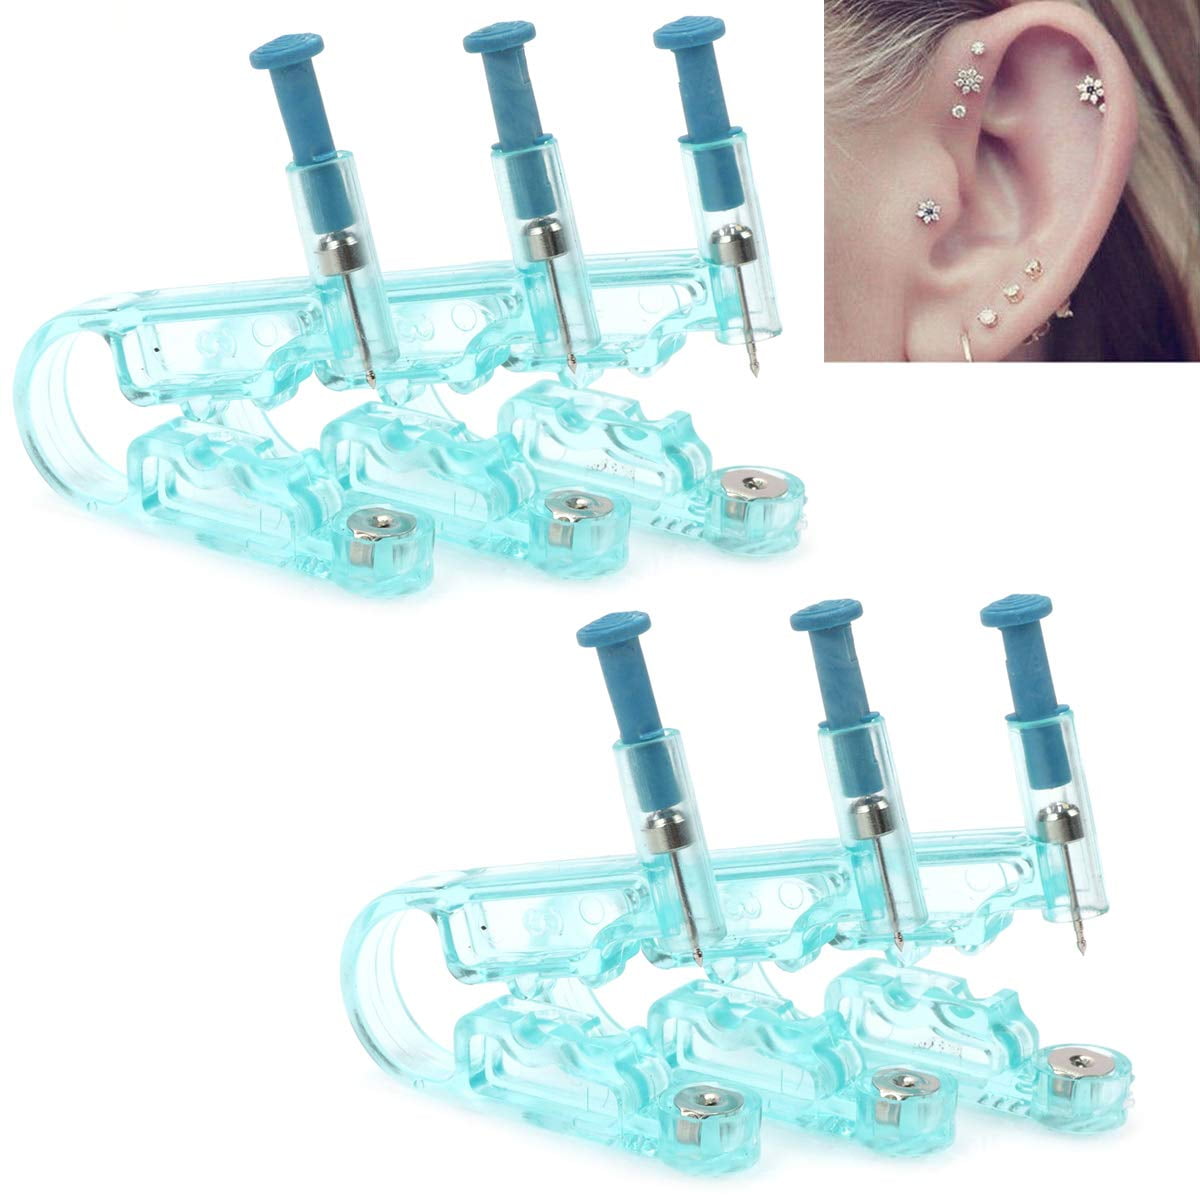 6pcs disposable Safety Ear Piercing Gun Unit Tool with Asepsis Pierce Kit  Blue for Piercing kit Piercing Supplies with Ear Stud